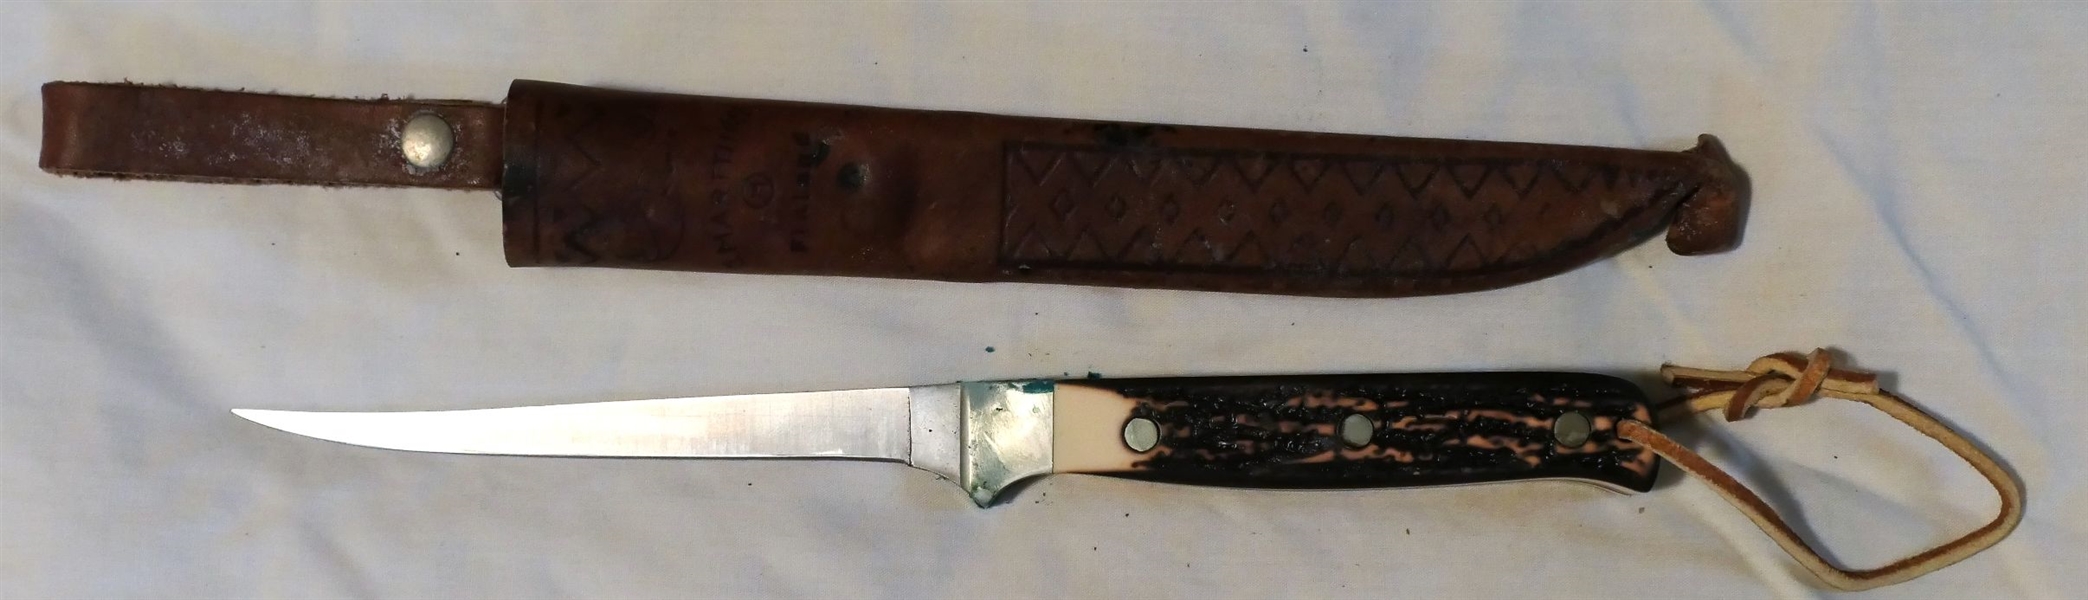 Schrade "Uncle Henry" Fish Fillet Knife - Number 168 - In Leather "J. Marttiini - Finland" Sheath - Knife Has Stag Handle - Measures 10"  Long